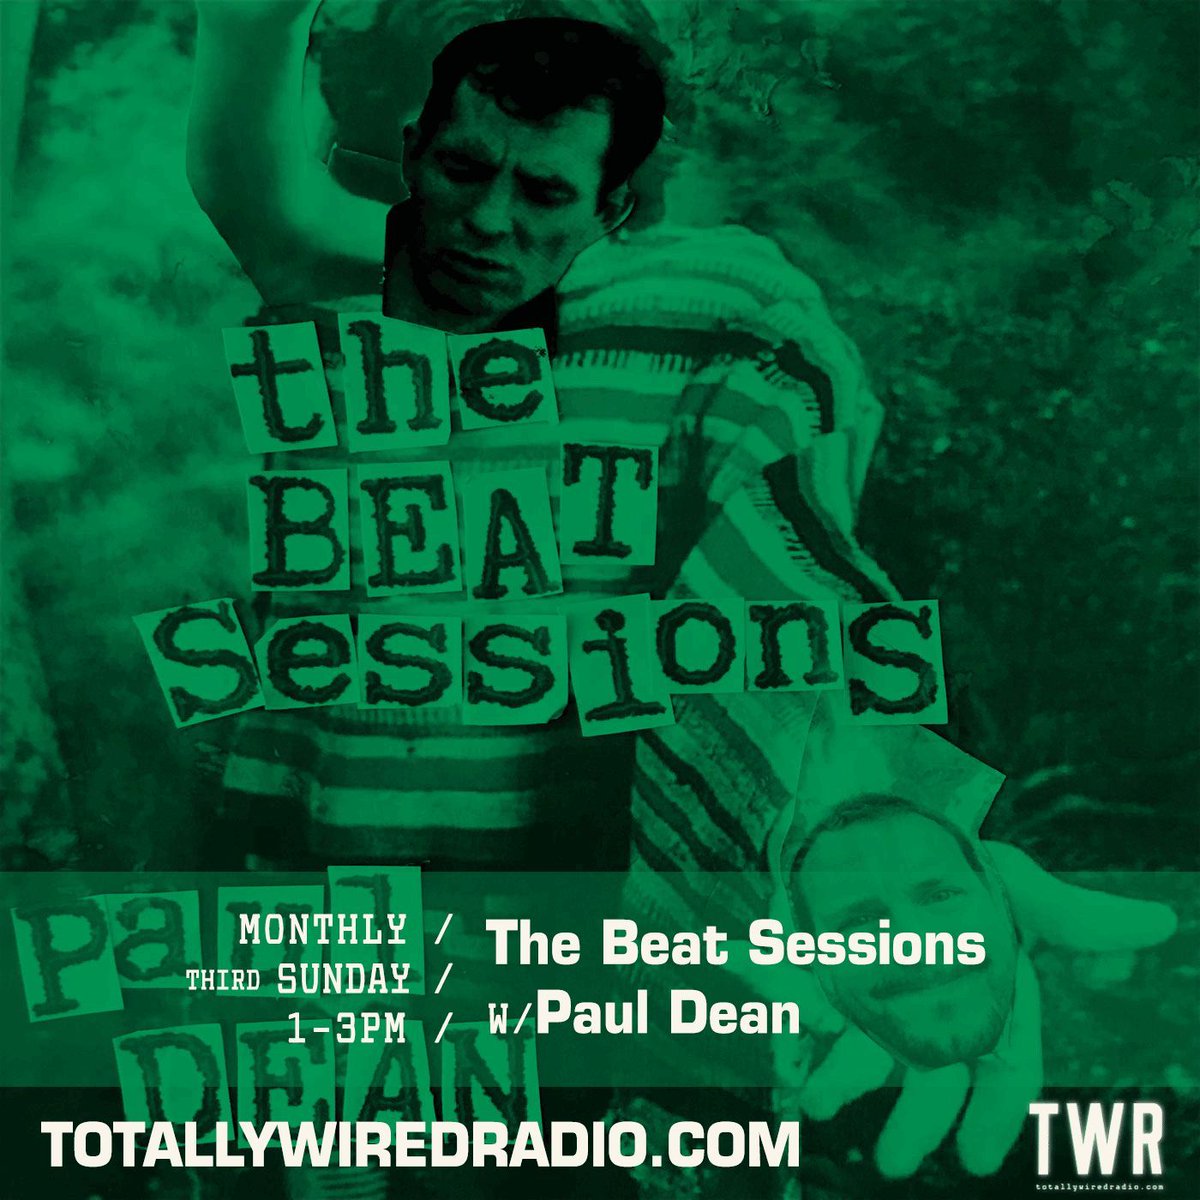 The Beat Sessions w/ Paul Dean #startingsoon on #TotallyWiredRadio Listen @ Link in bio. - #MusicIsLife #London #Southend - #60sPsychedelia #Garage #Funk #Soul #Country #Folk #Jazz #Blues #Soundtrack